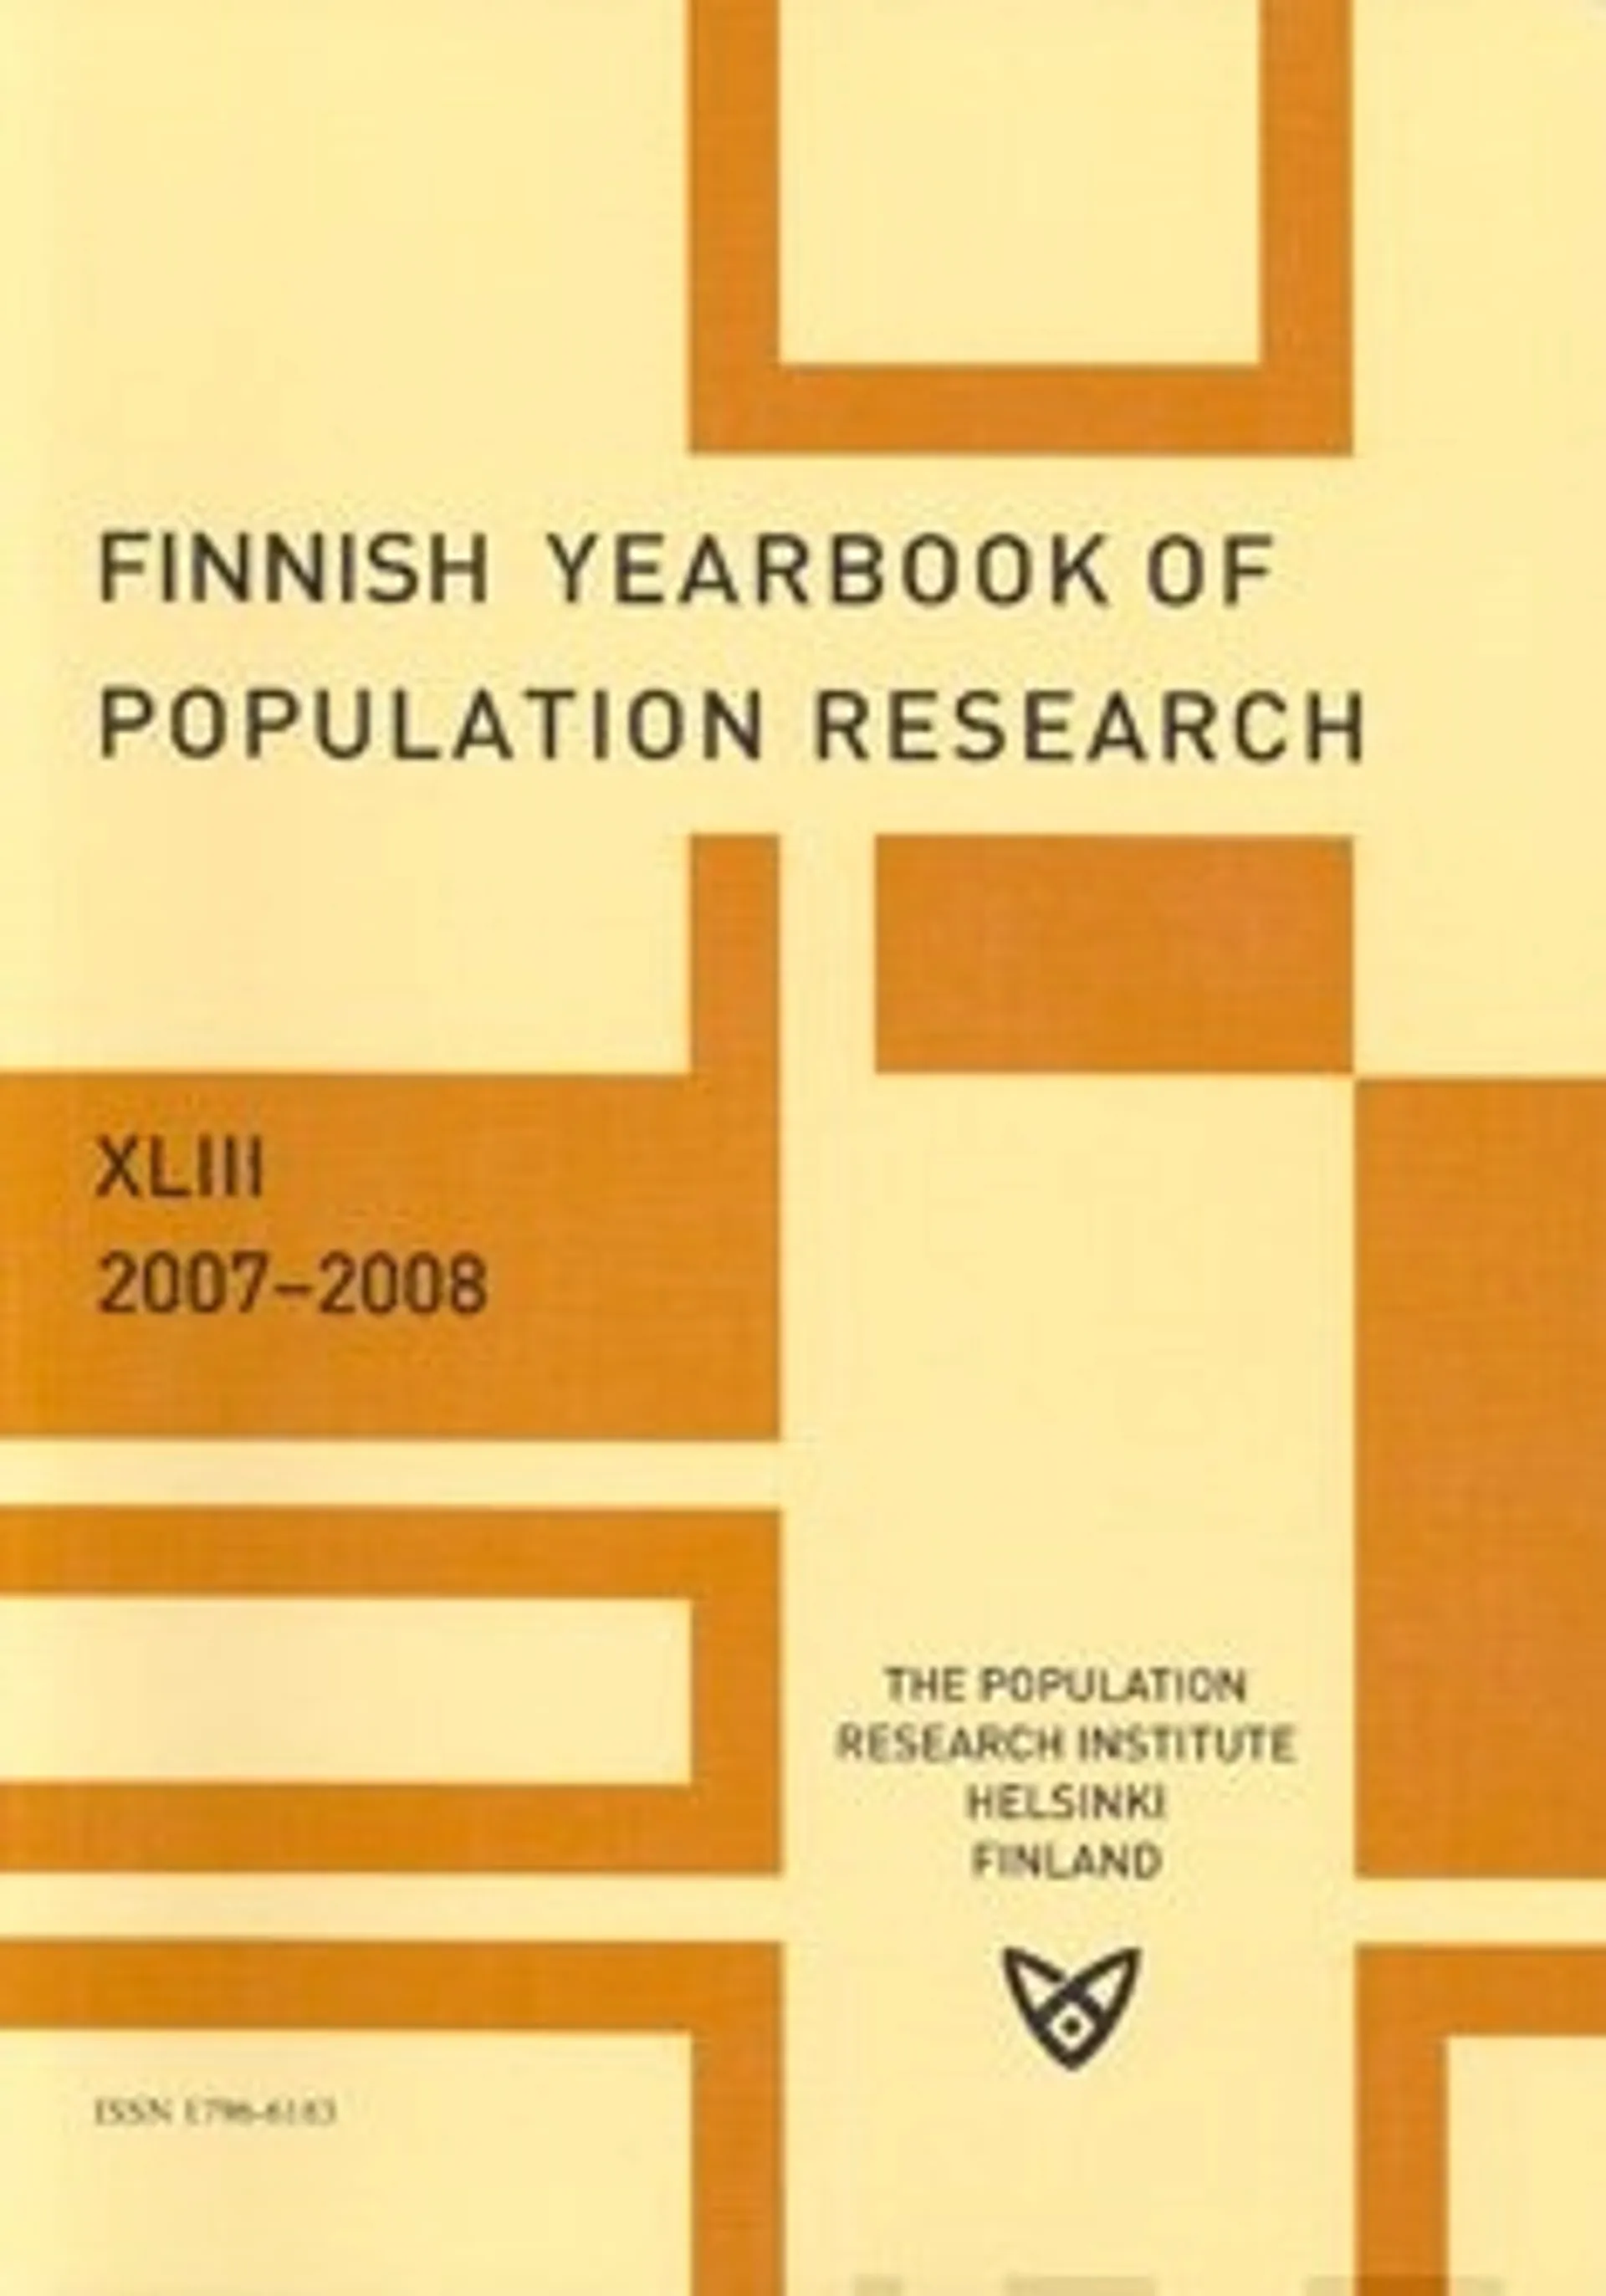 Finnish yearbook of population research XLIII 2007-2008